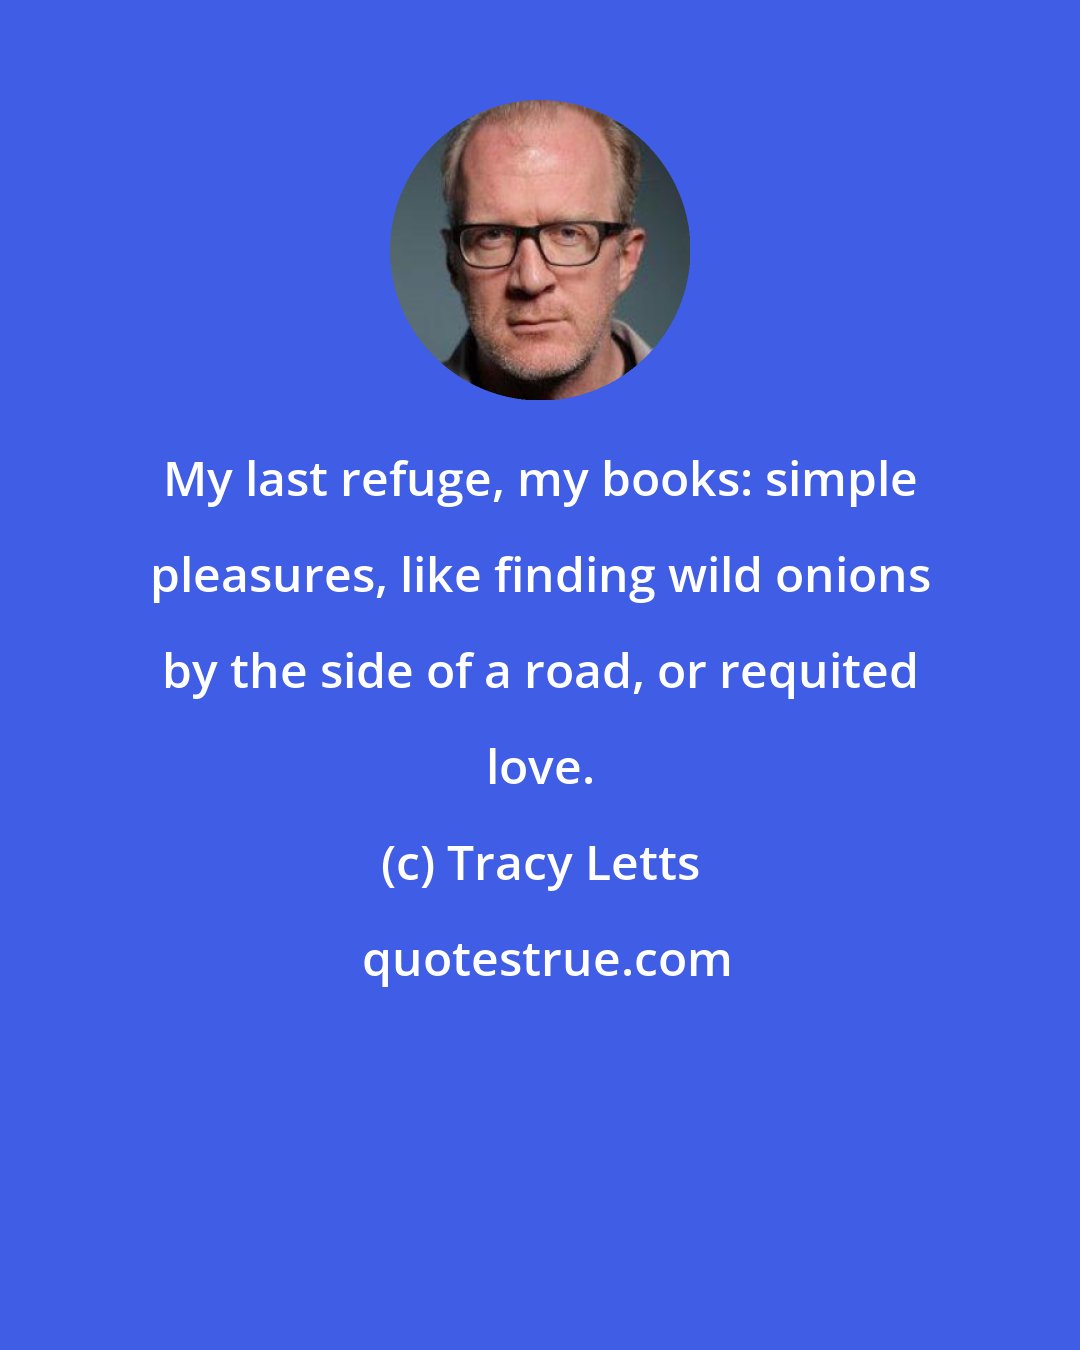 Tracy Letts: My last refuge, my books: simple pleasures, like finding wild onions by the side of a road, or requited love.